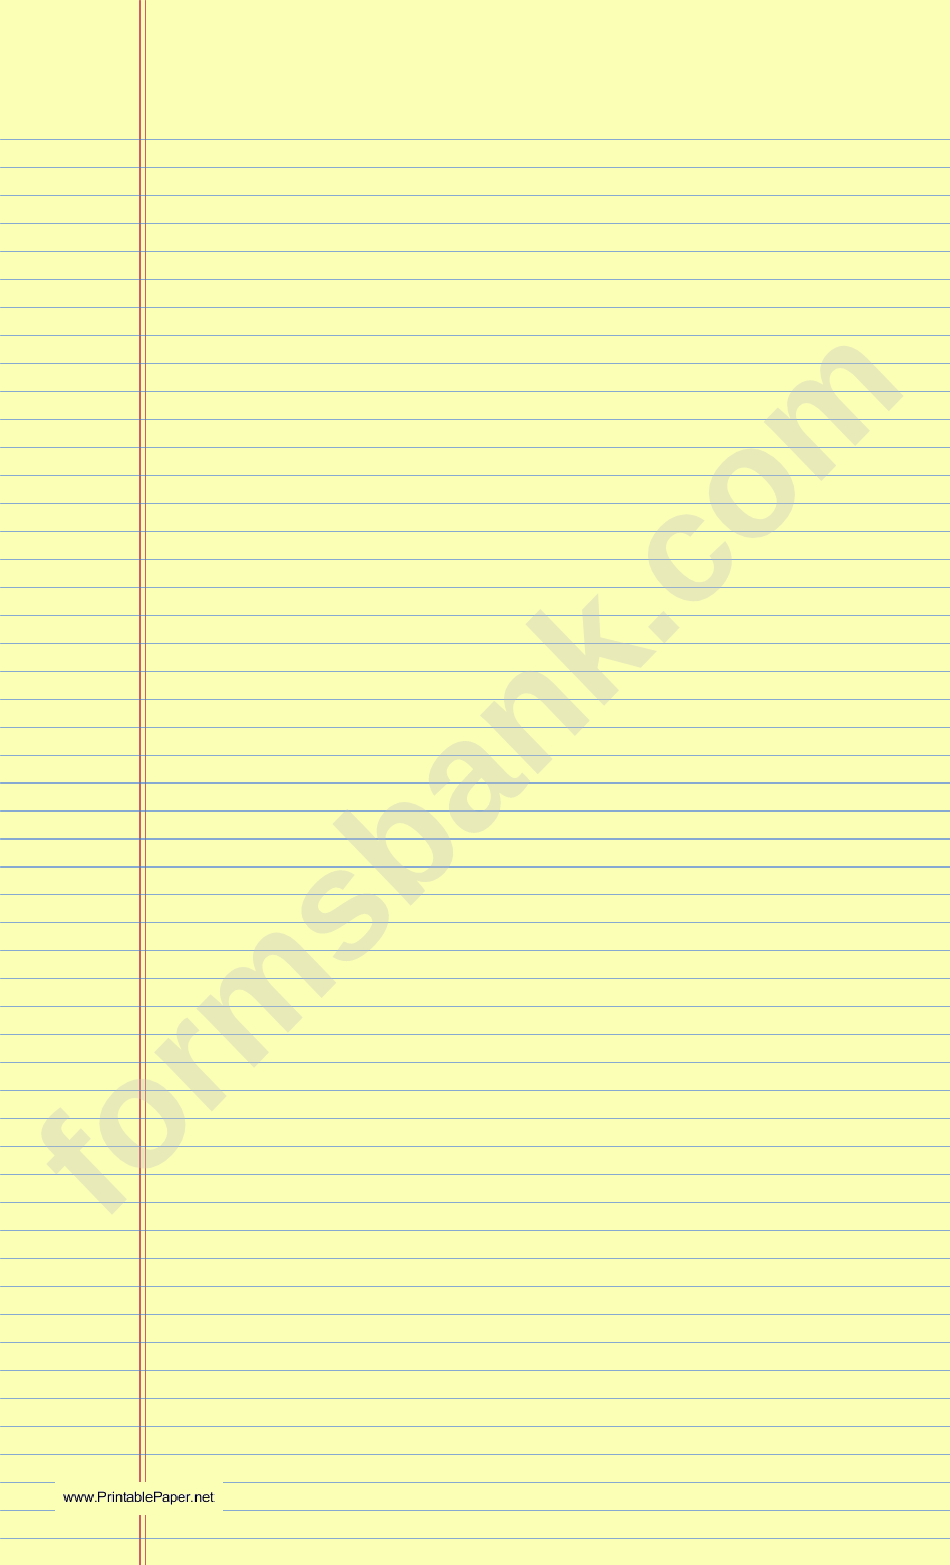 Lined Paper With Borders